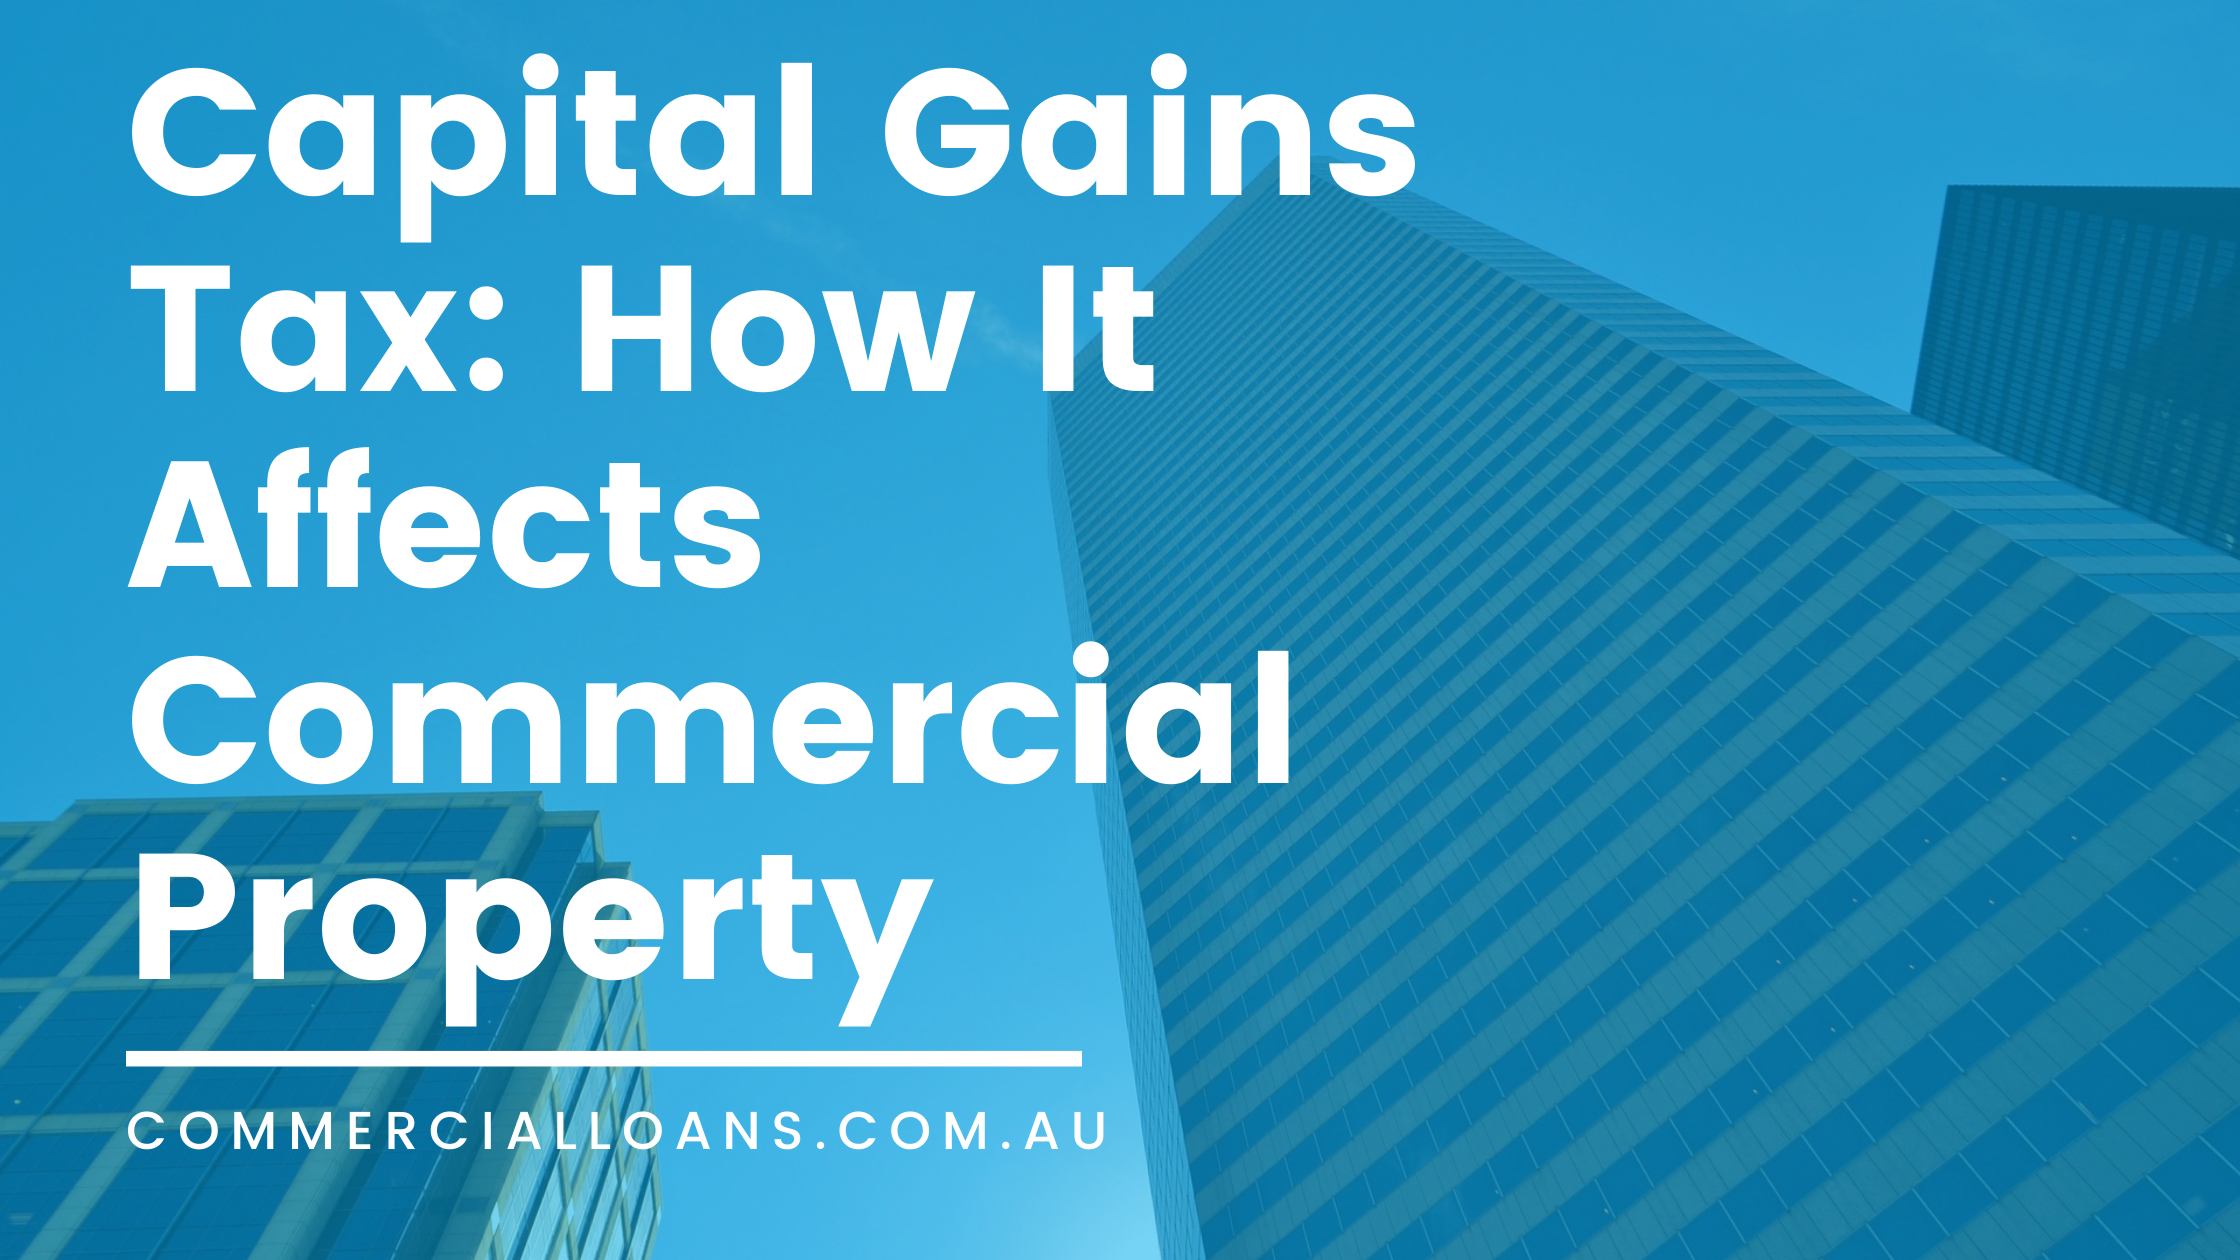 Capital Gains Tax: How It Affects Commercial Property